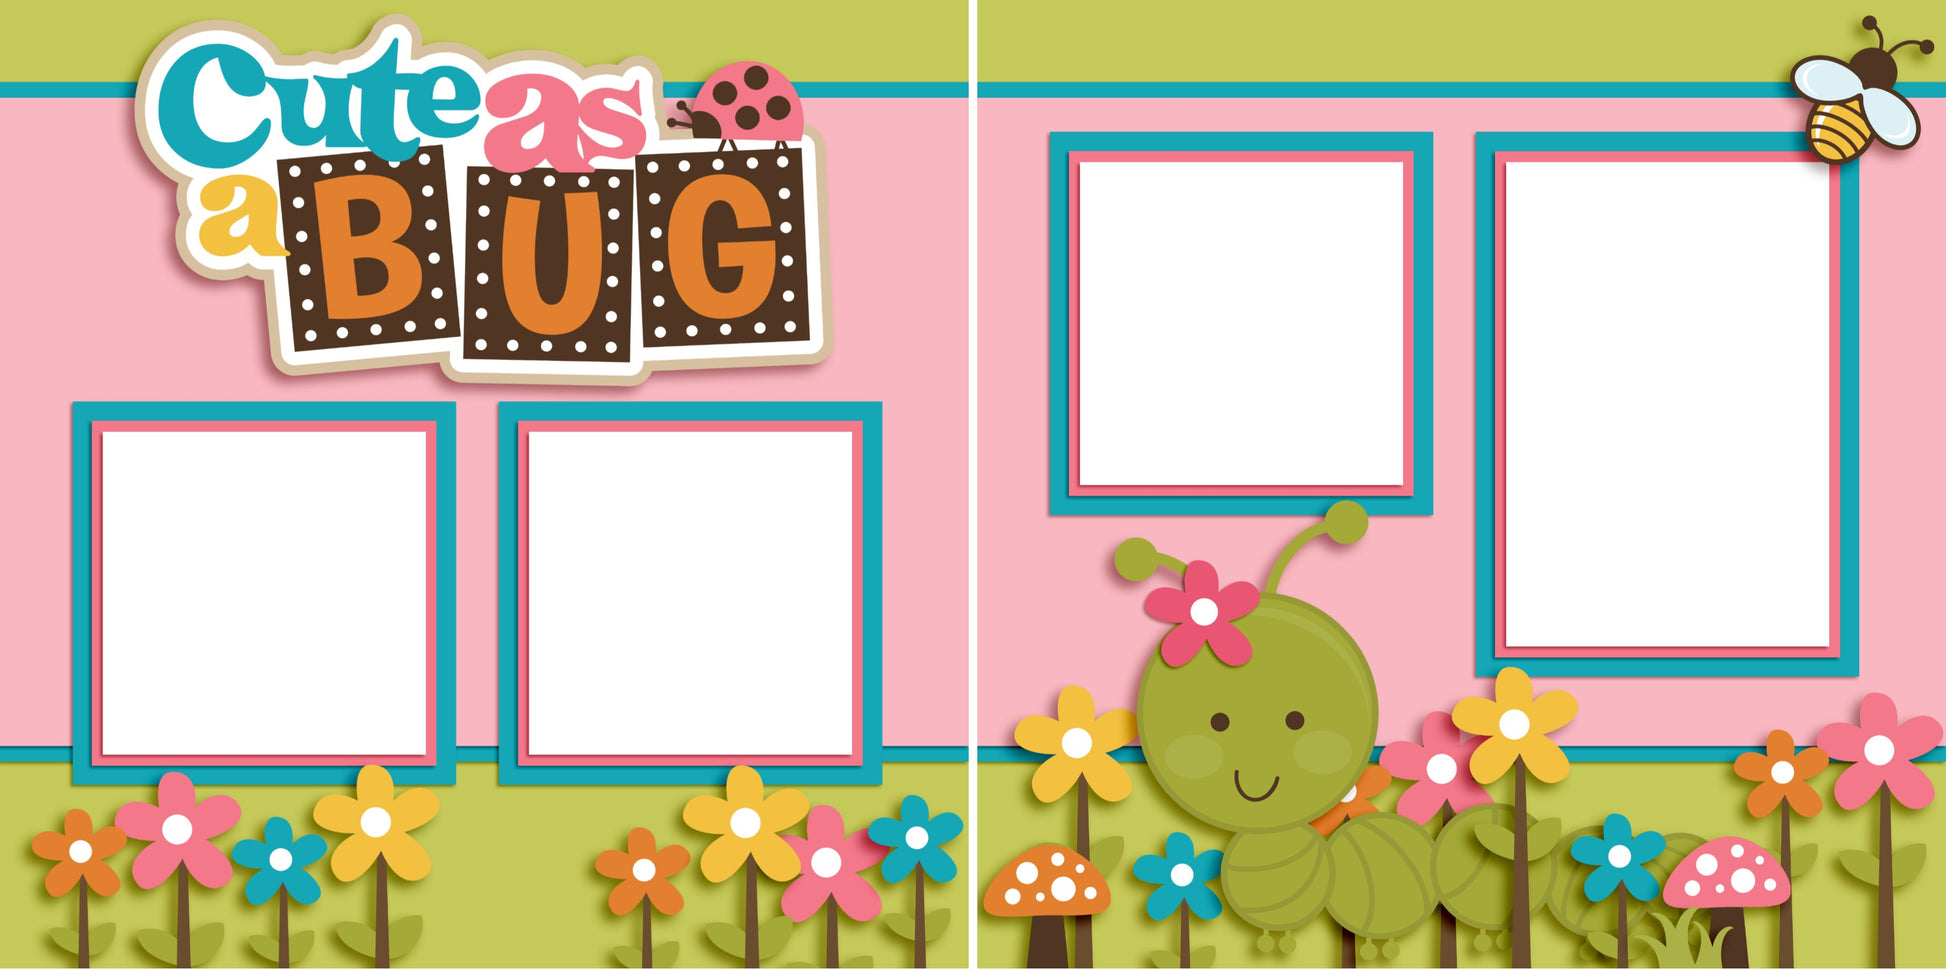 Cute as a Bug Girl - Digital Scrapbook Pages - INSTANT DOWNLOAD - EZscrapbooks Scrapbook Layouts Baby - Toddler, Farm - Garden, Outside Play